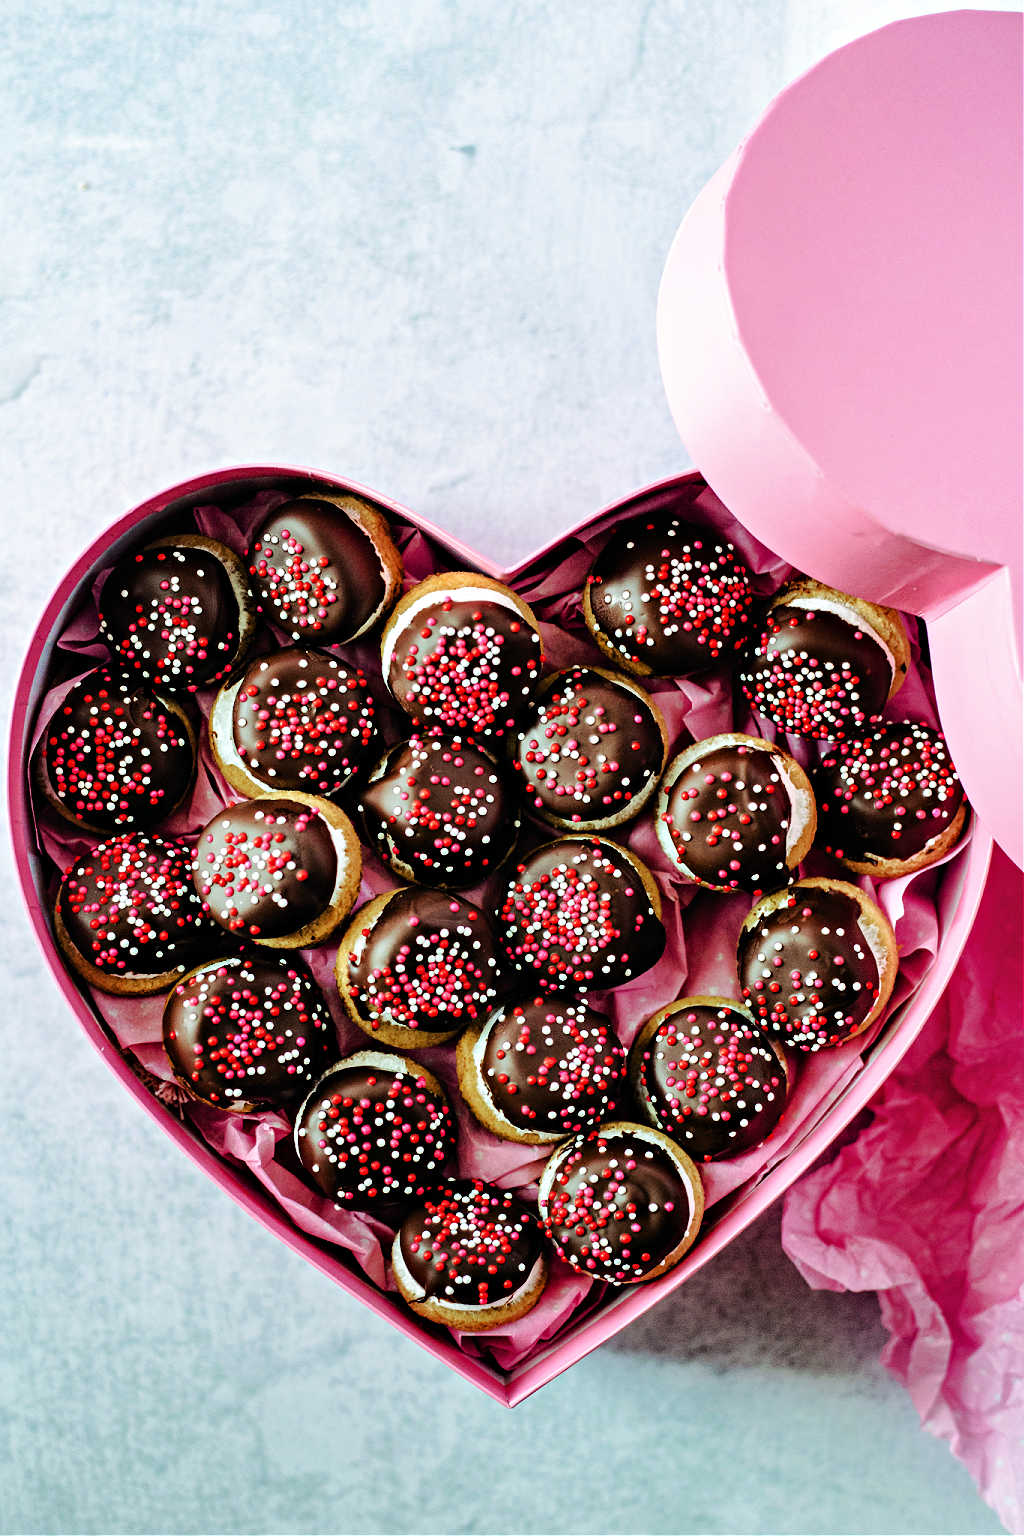 chocolate marshmallow cookies in a pink heart shaped box